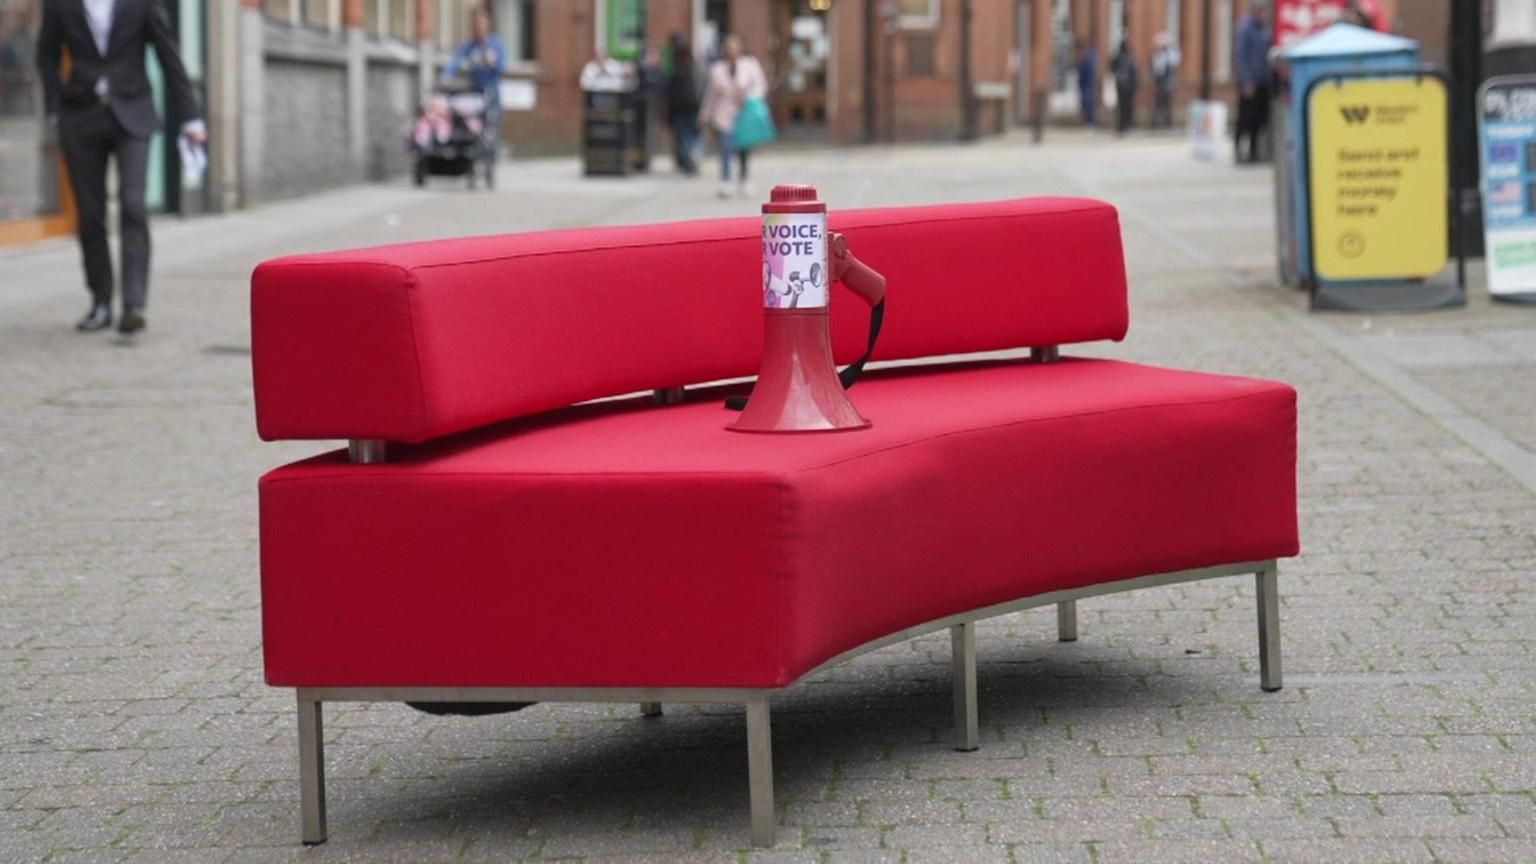 Red sofa with megaphone on it in Aldershot town centre